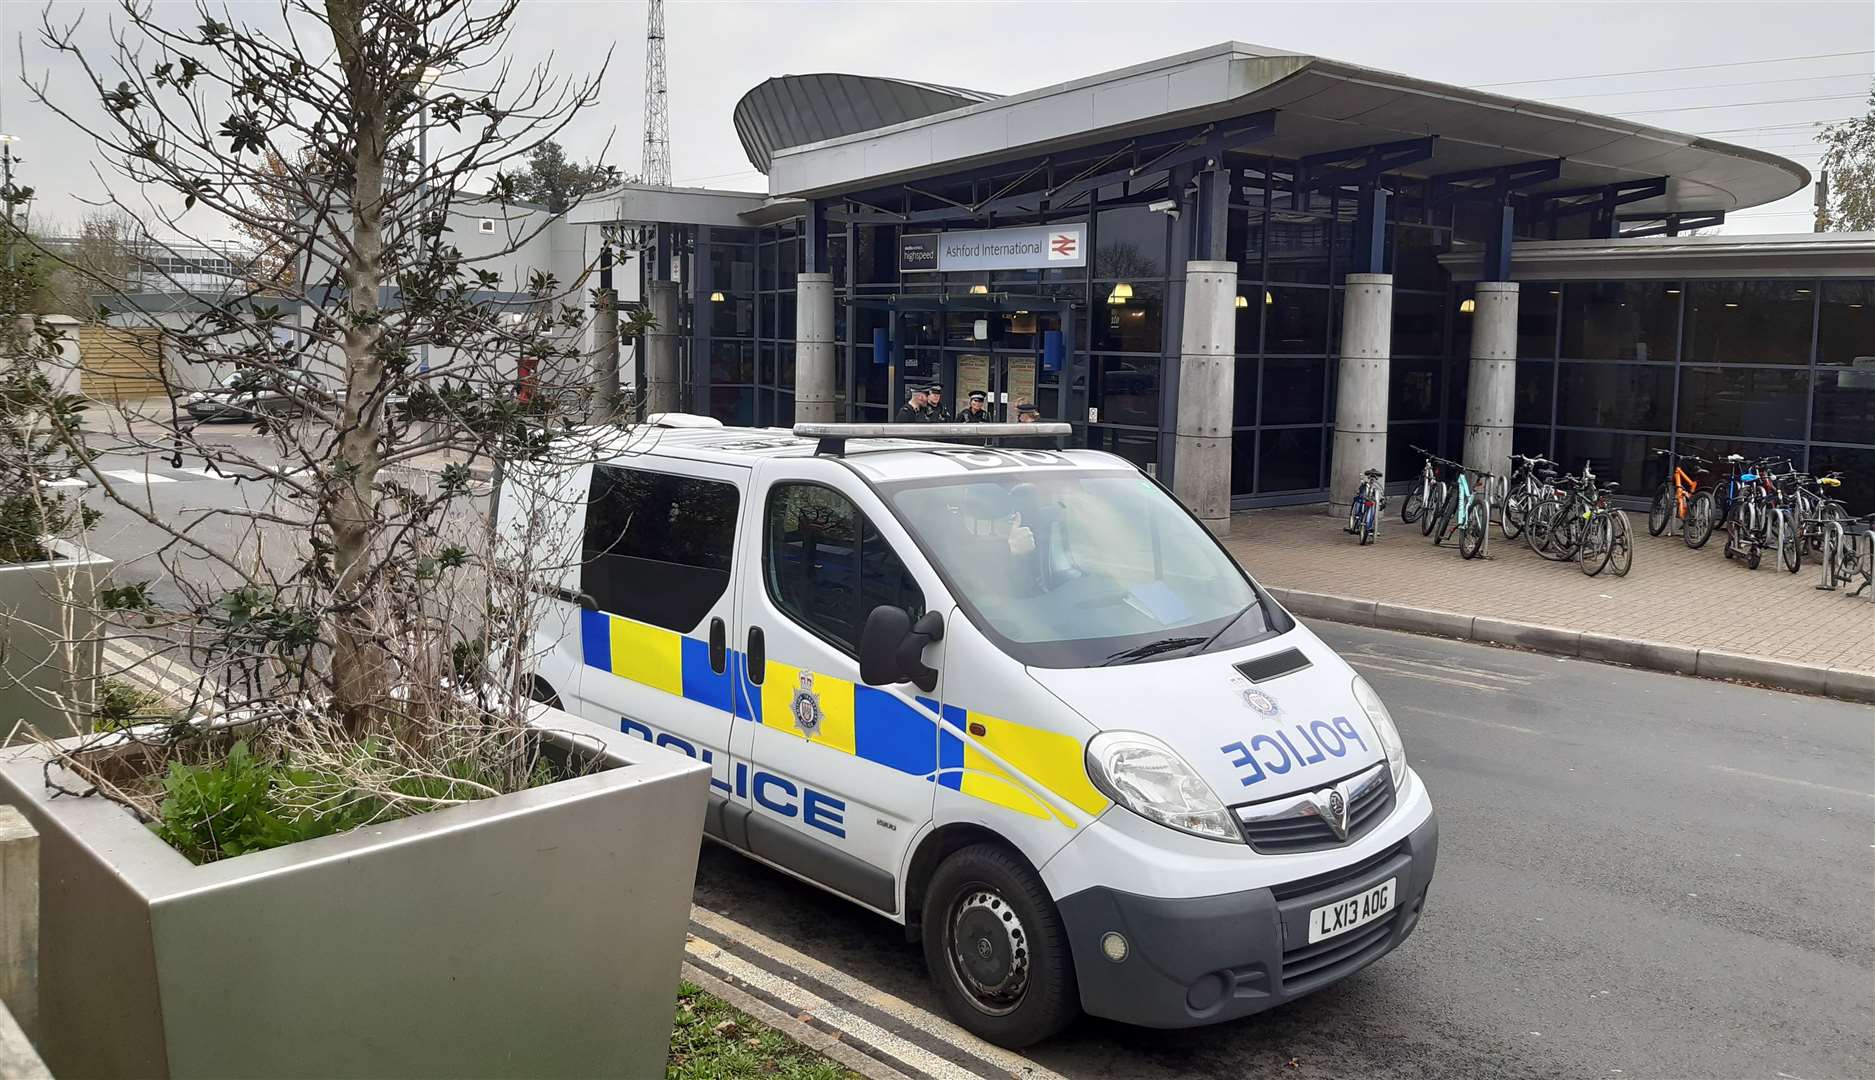 Officers from Kent Police and the British Transport Police were at the station